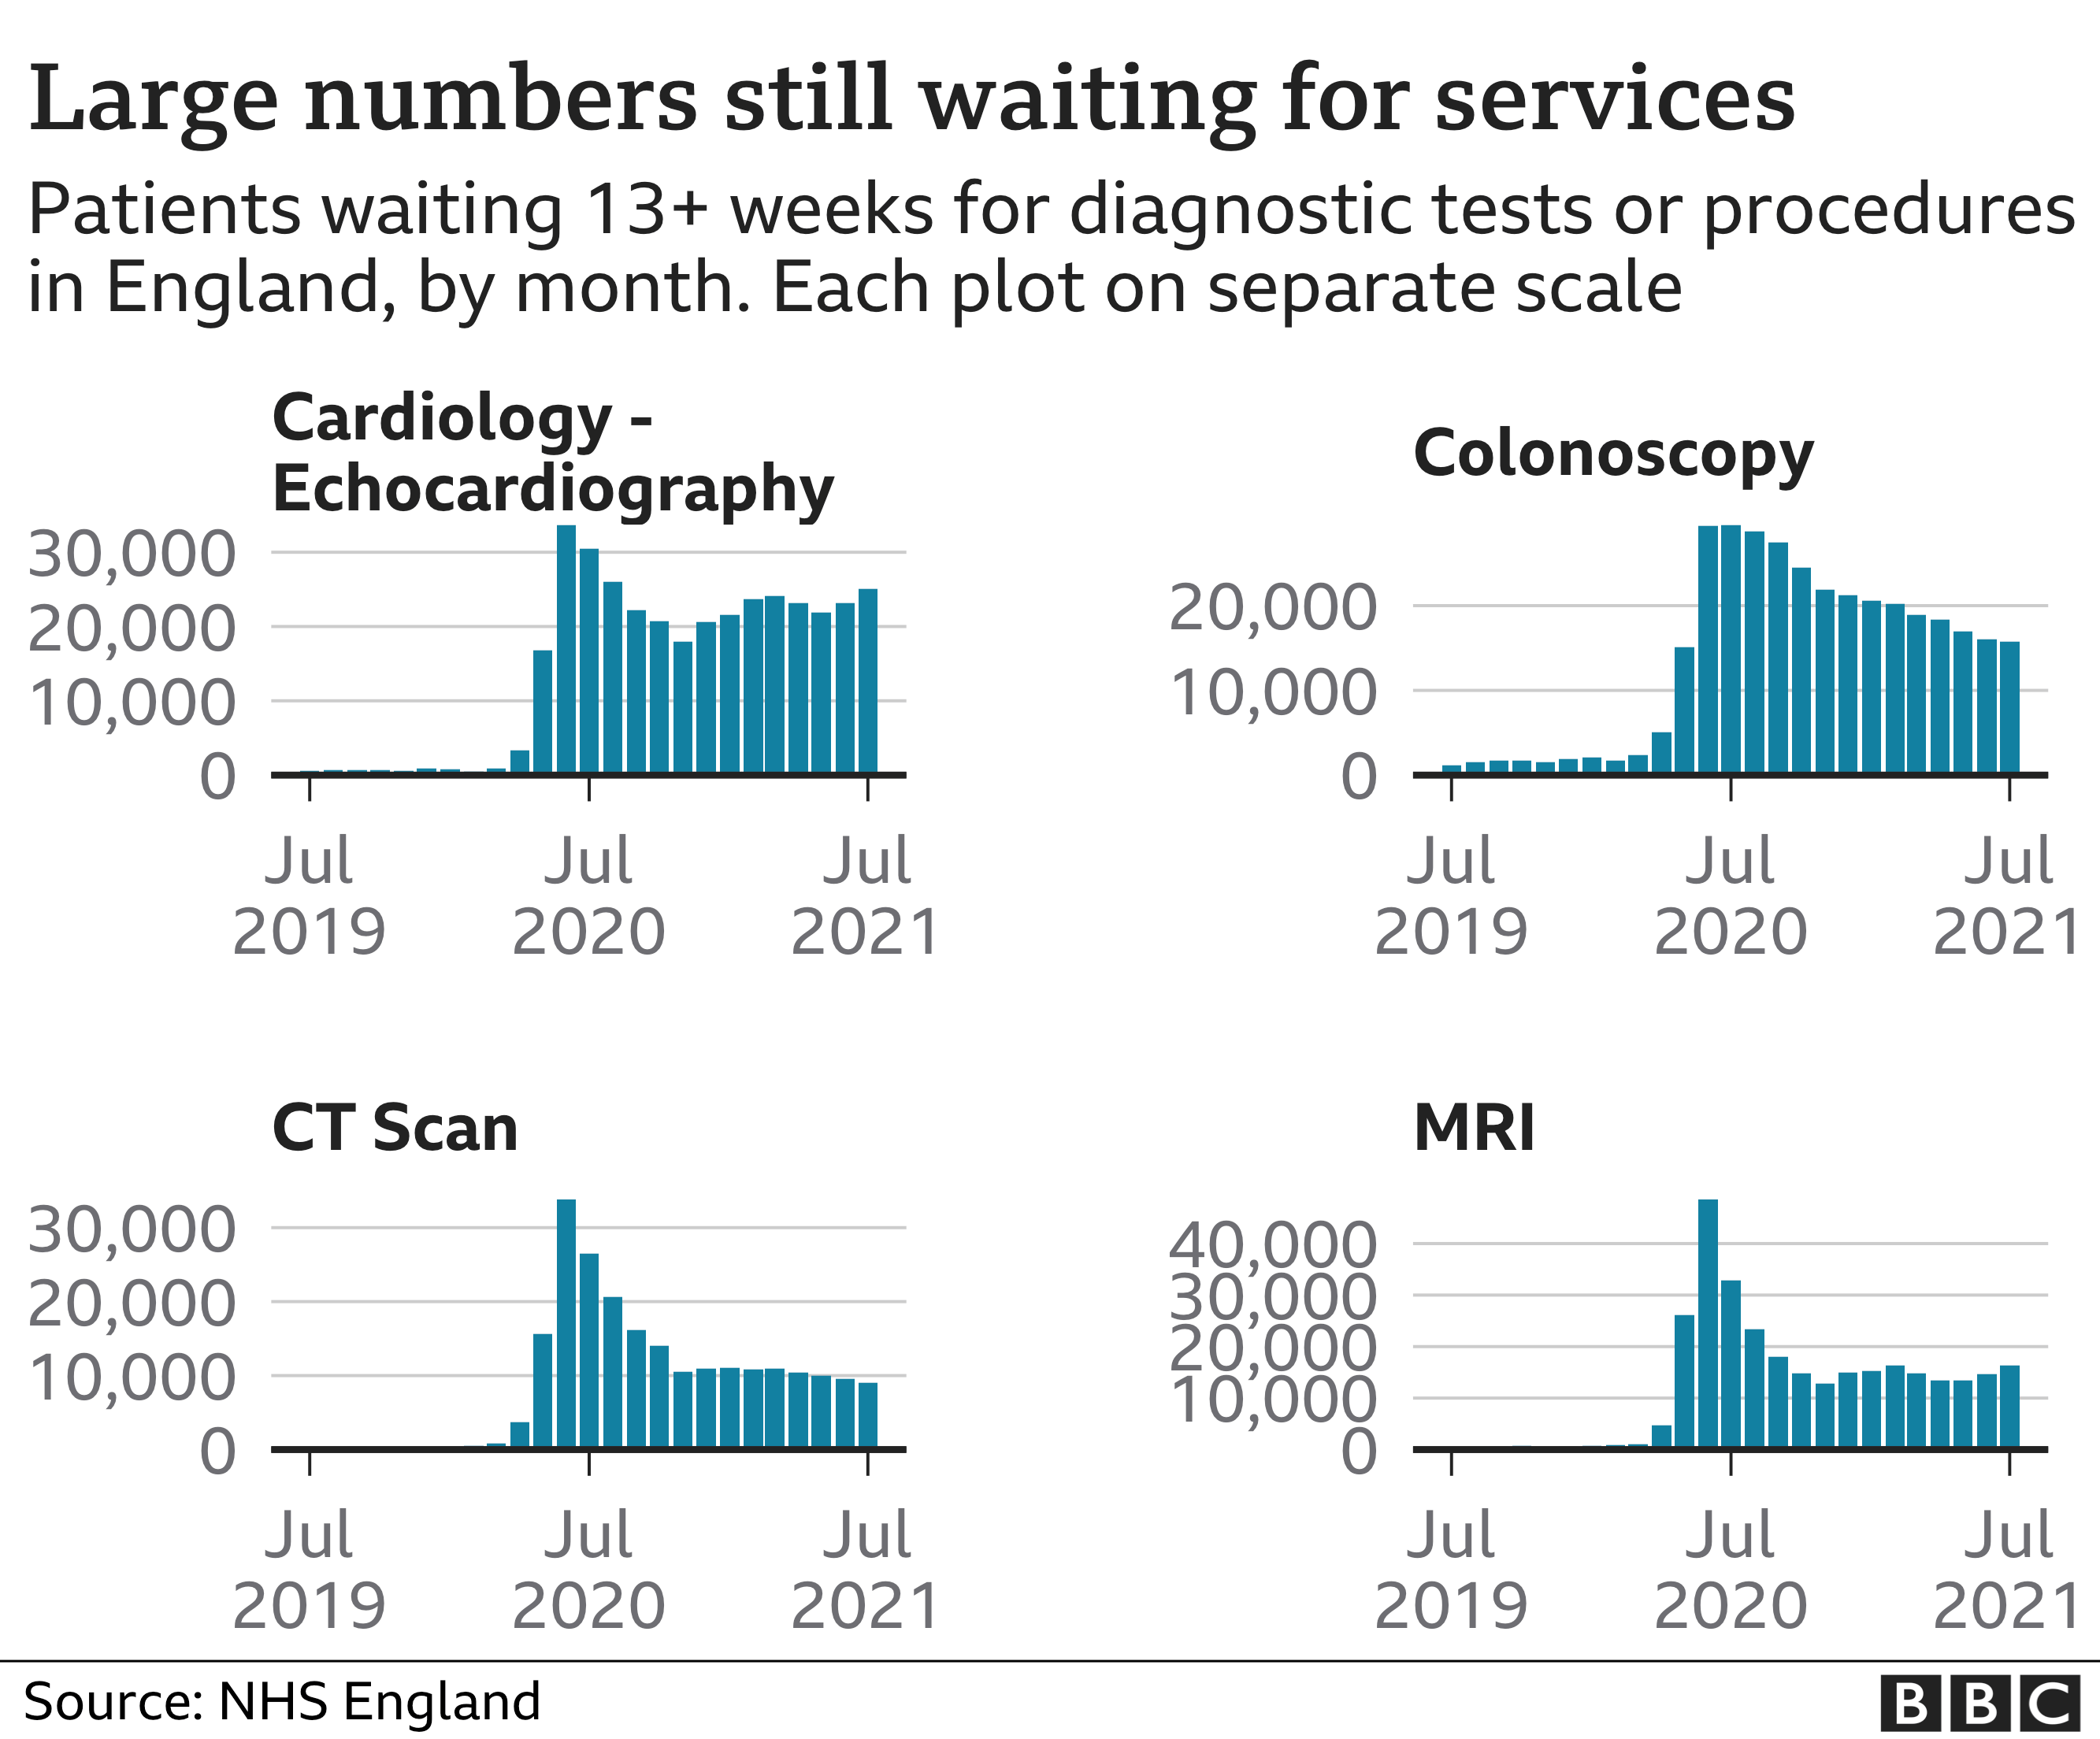 Chart showing that large numbers of people are still waiting for services